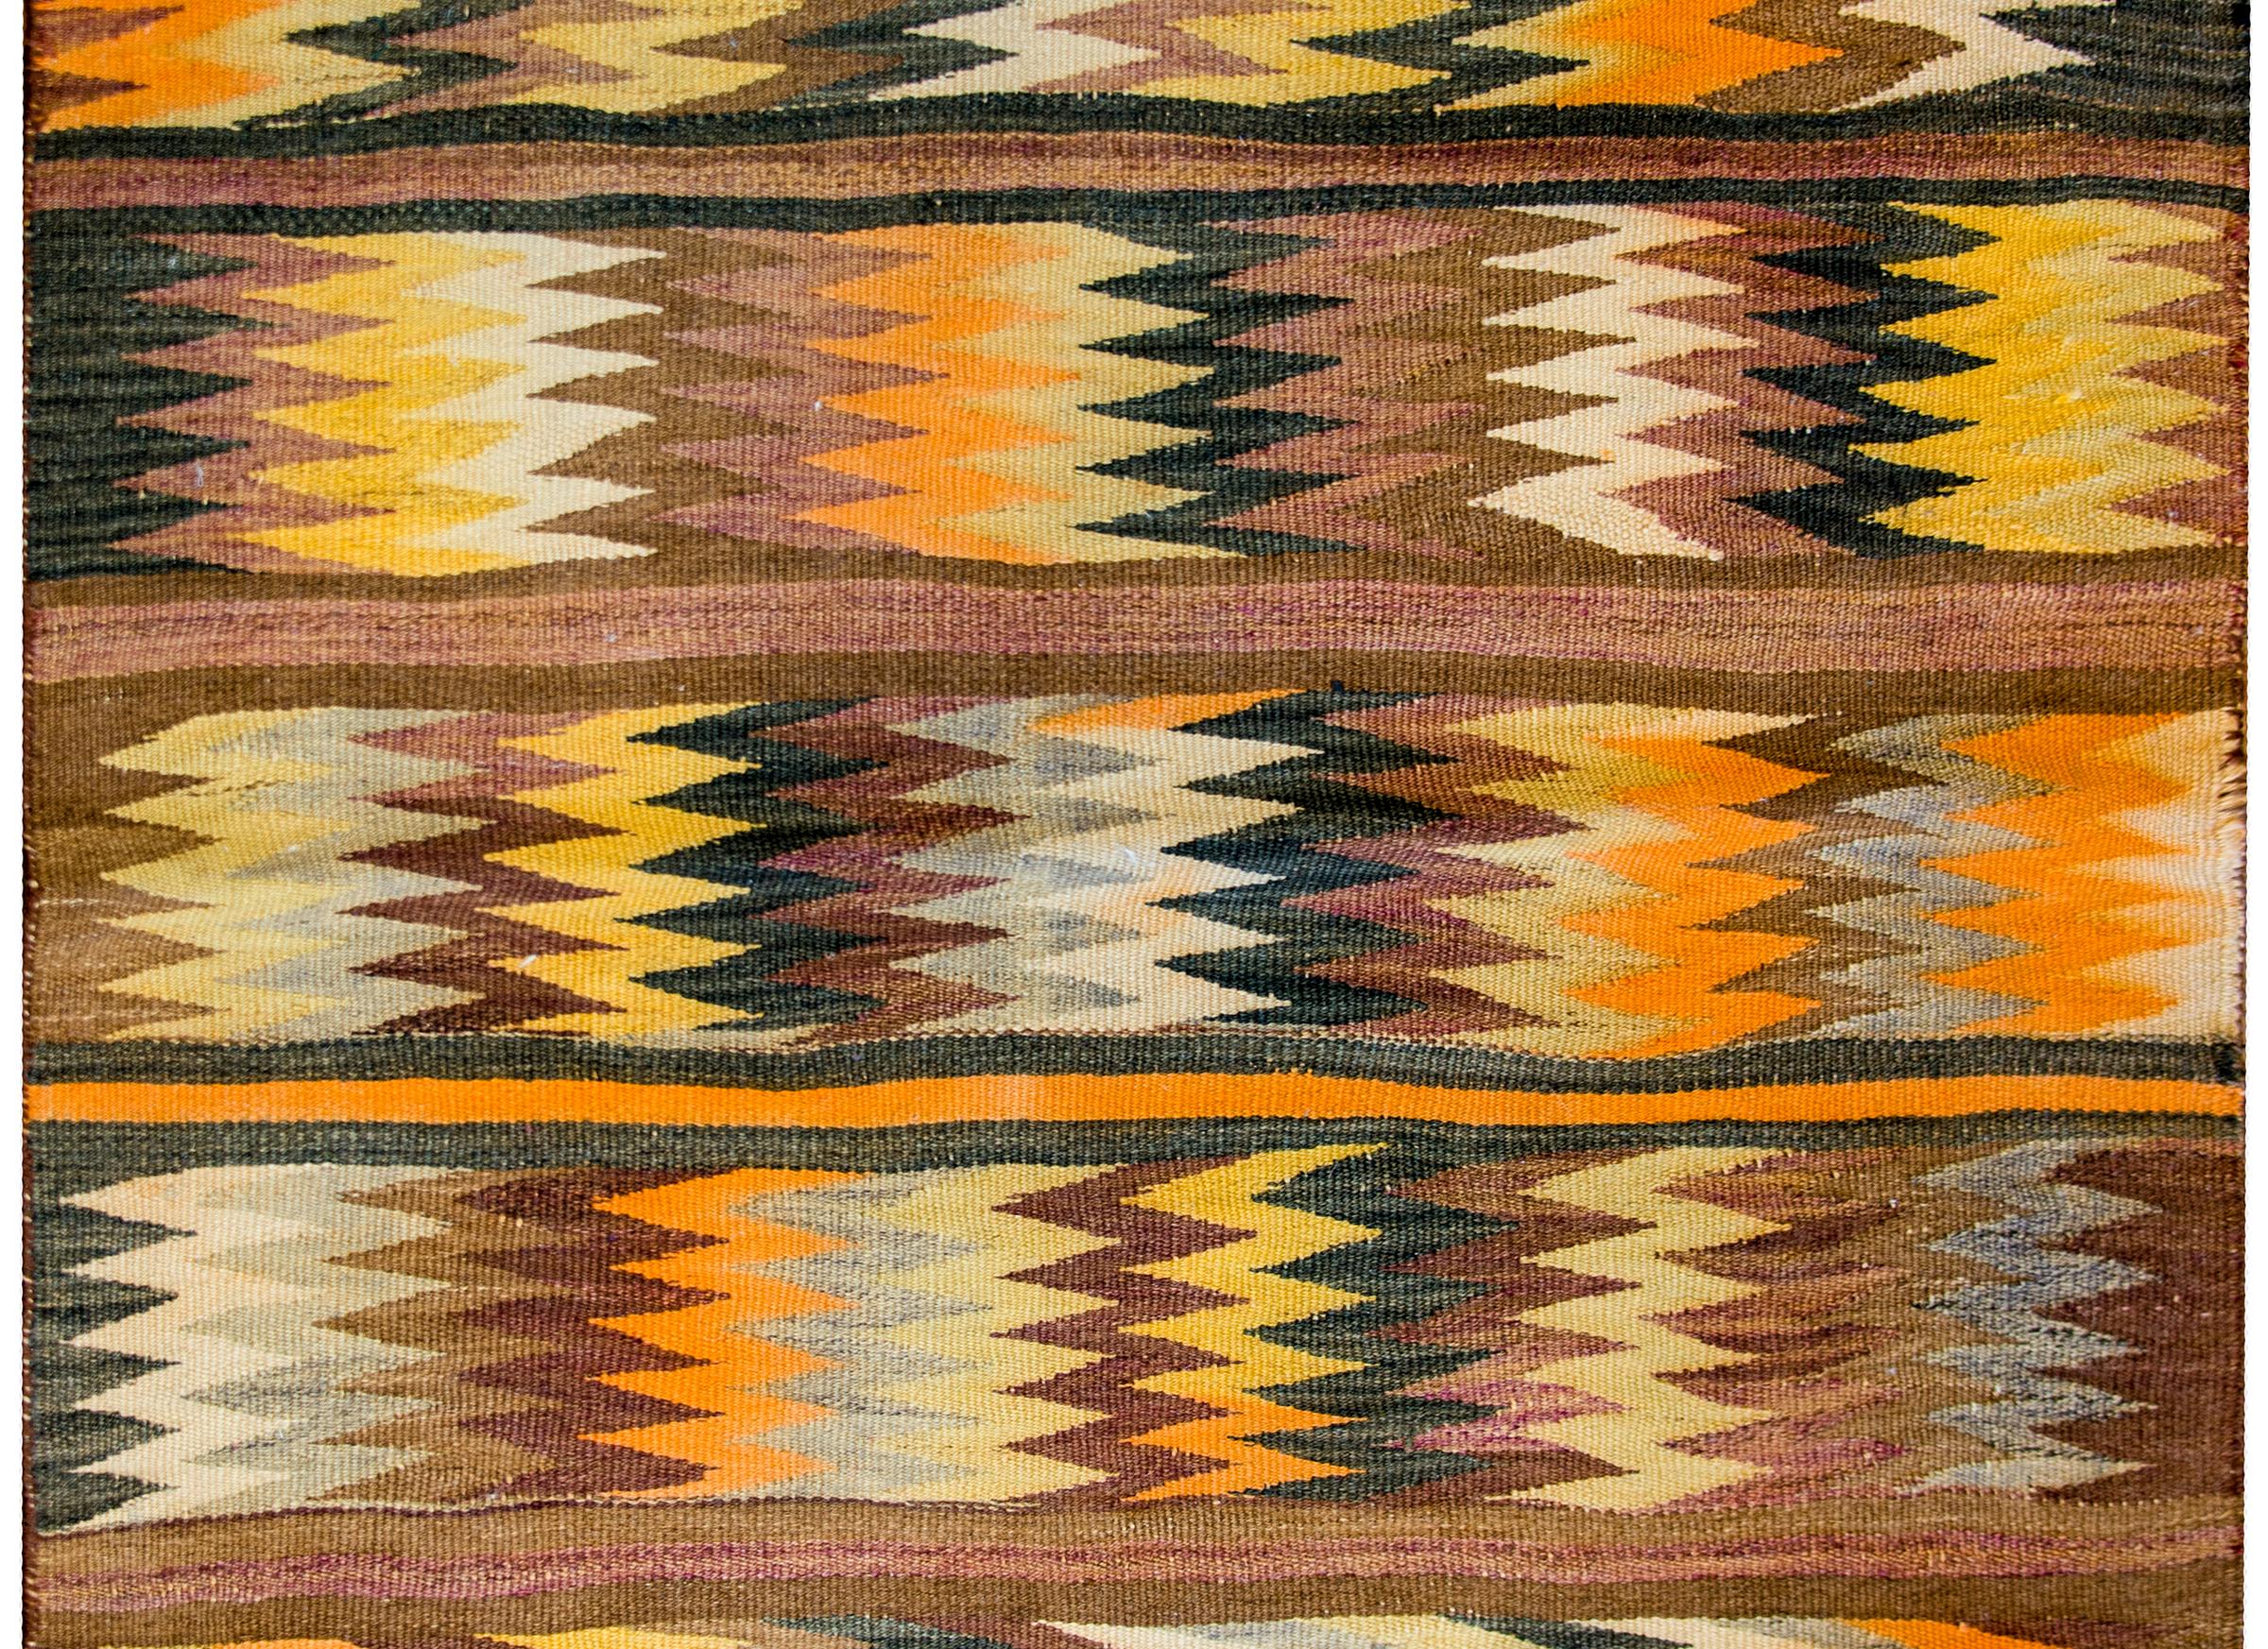 A wonderful early 20th century Persian Baluchi kilim rug with a bold multi-colored zigzag pattern arranged in stripes with solid colored stripes between.